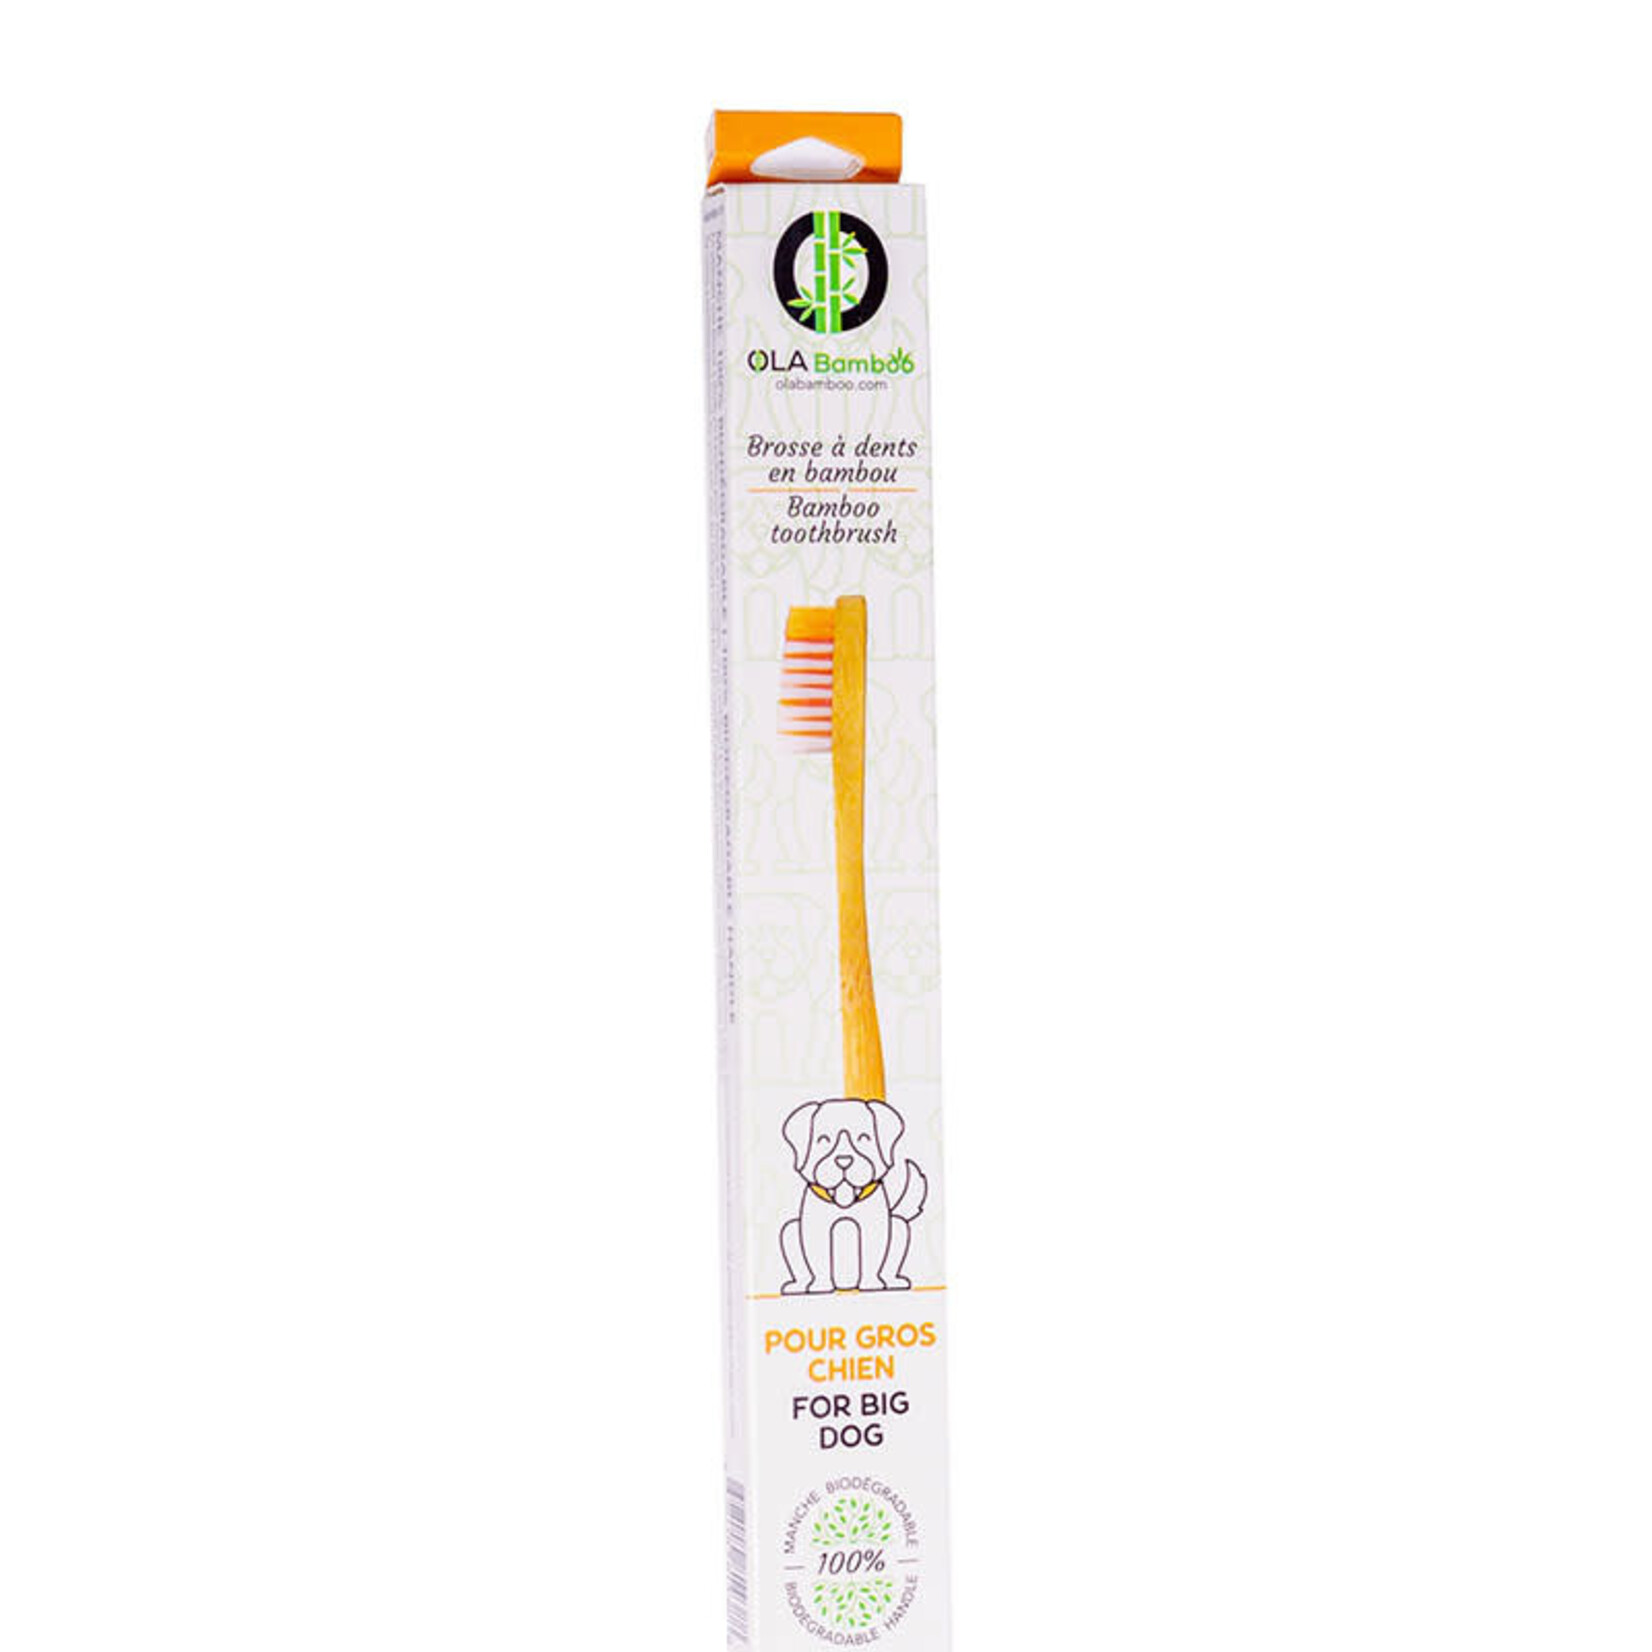 OLA Bamboo - Brosse à dents pour animaux